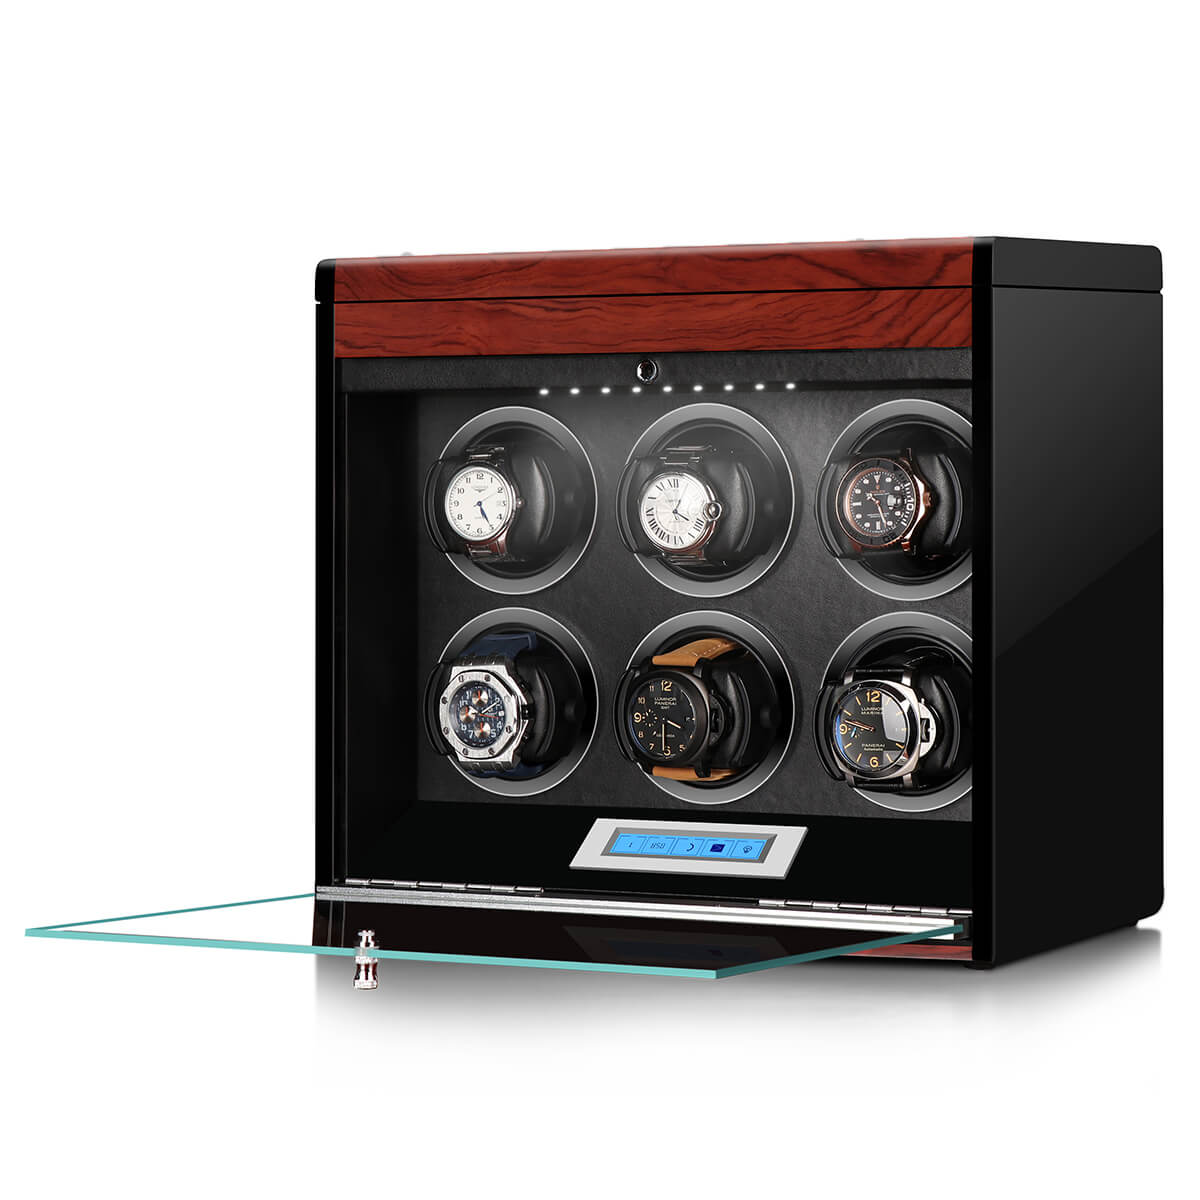 6 Watch Winder with Extra Storage with Wood Veneer Finish by Aevitas - Special Offer